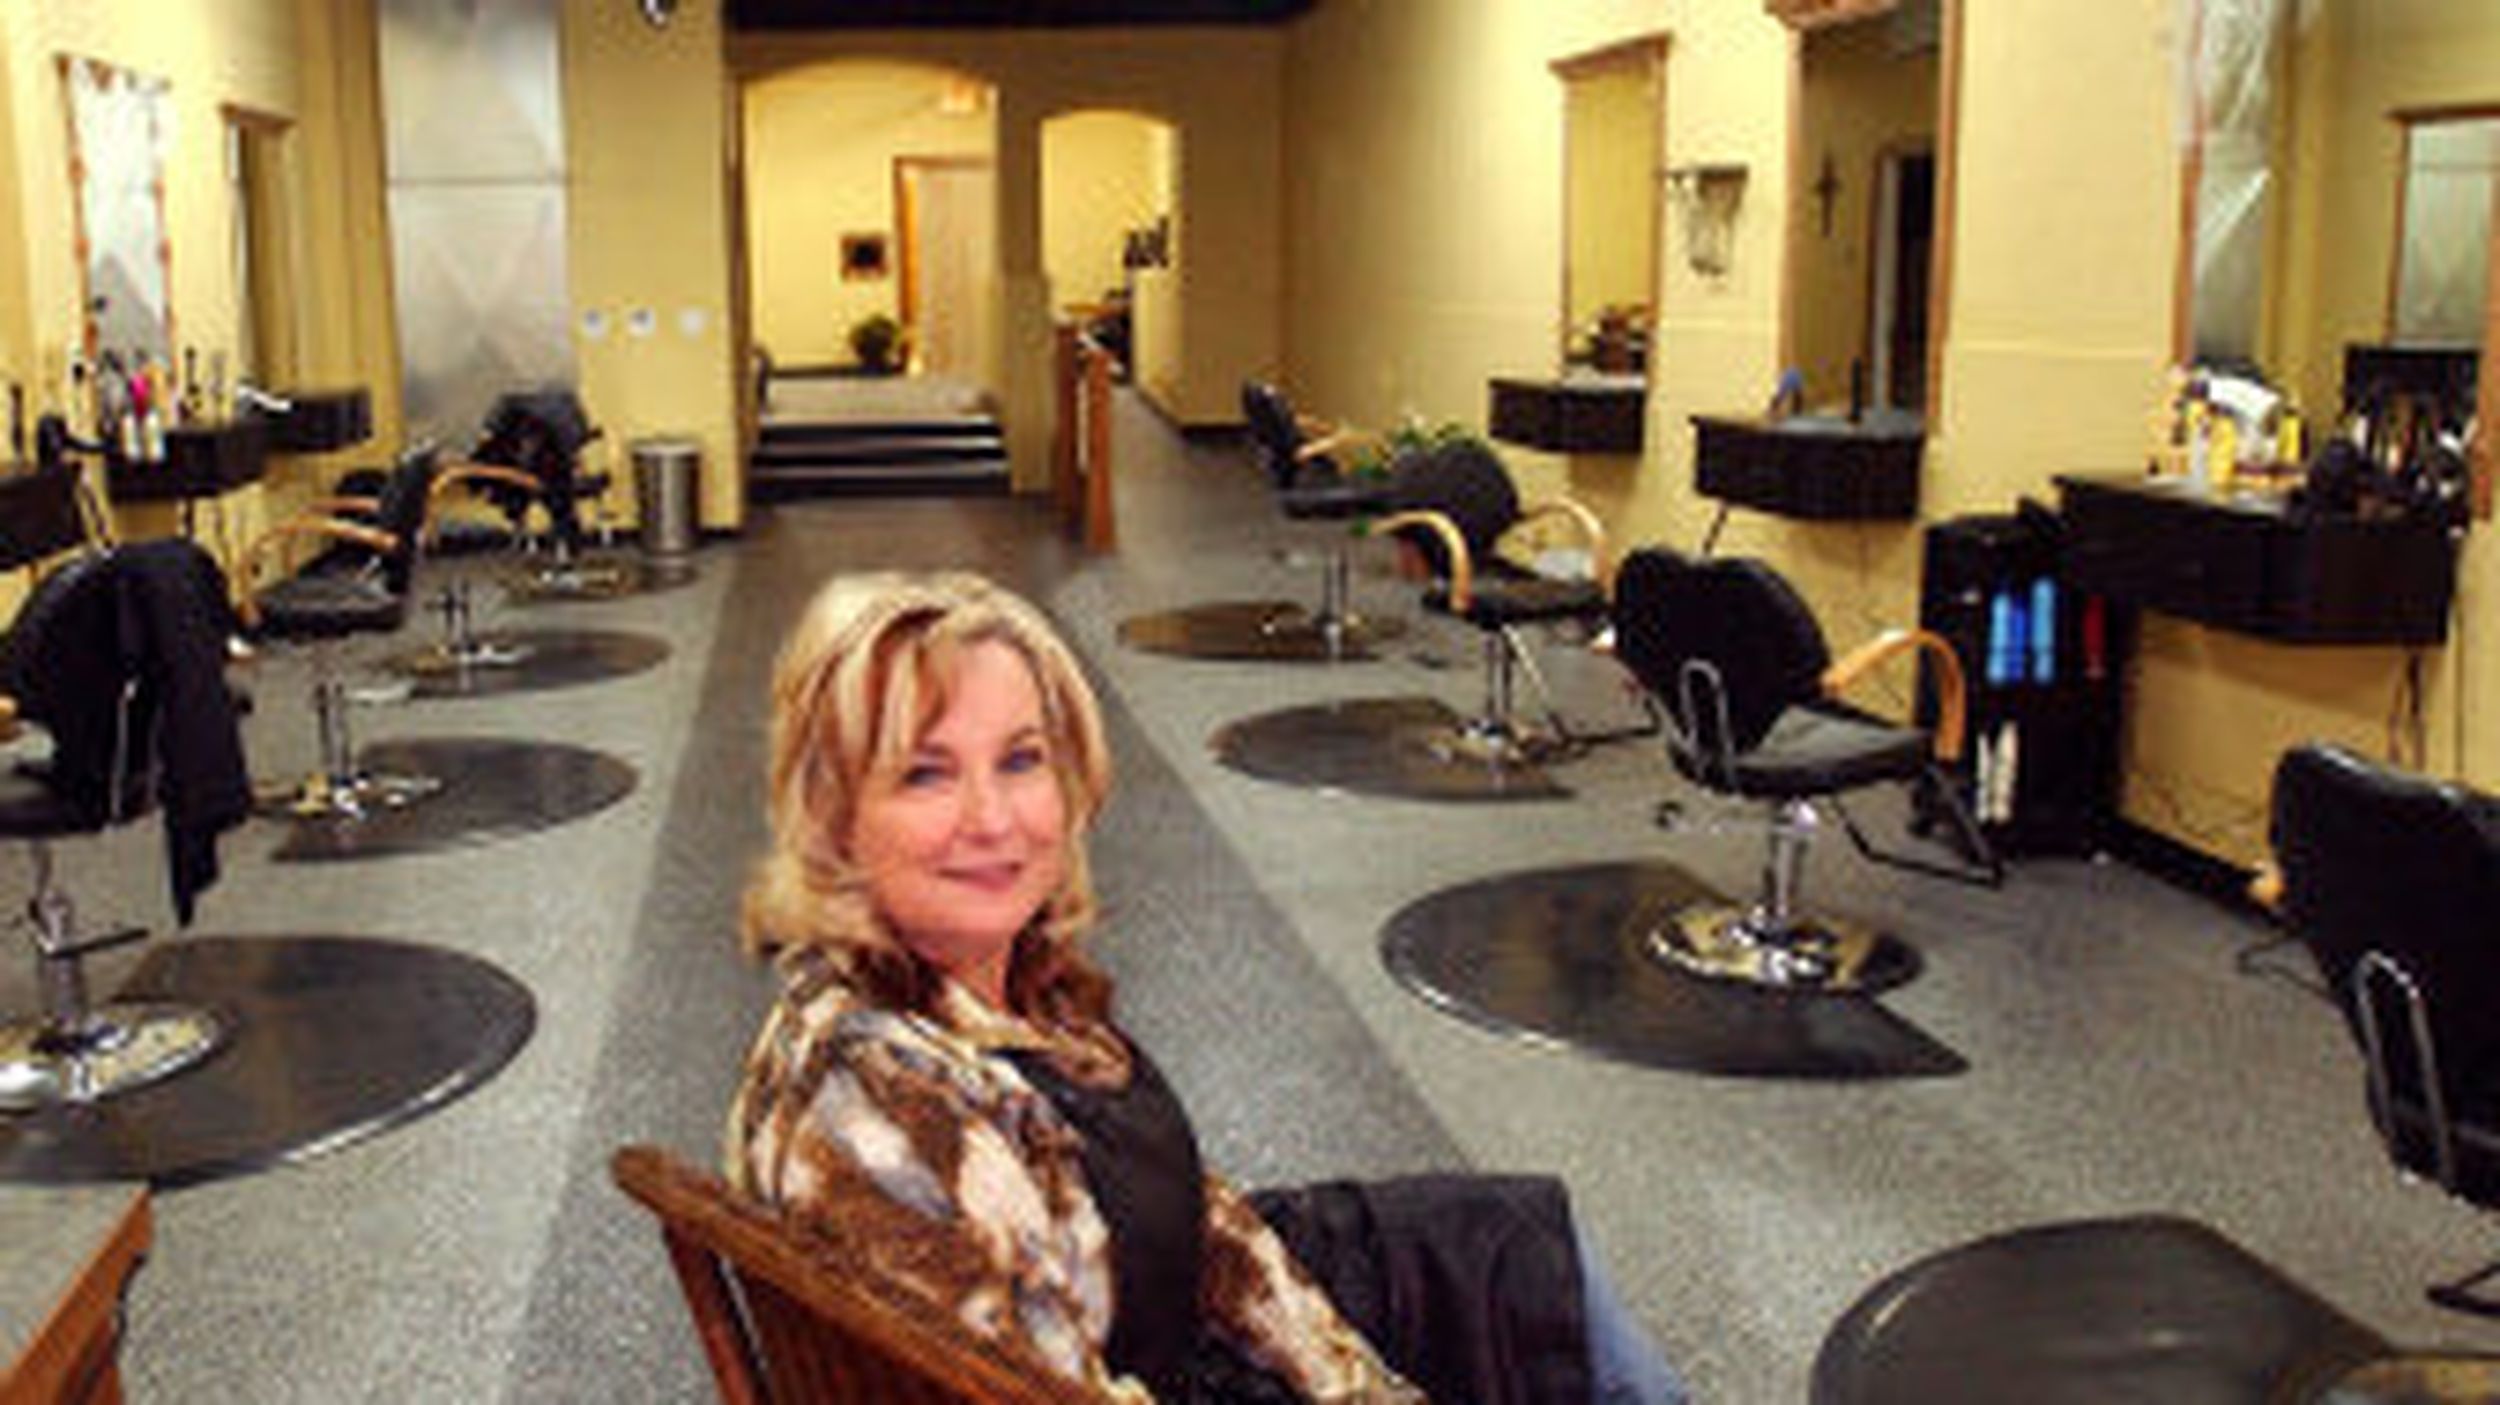 New hair salon adds even more beauty to CdA | The Spokesman-Review